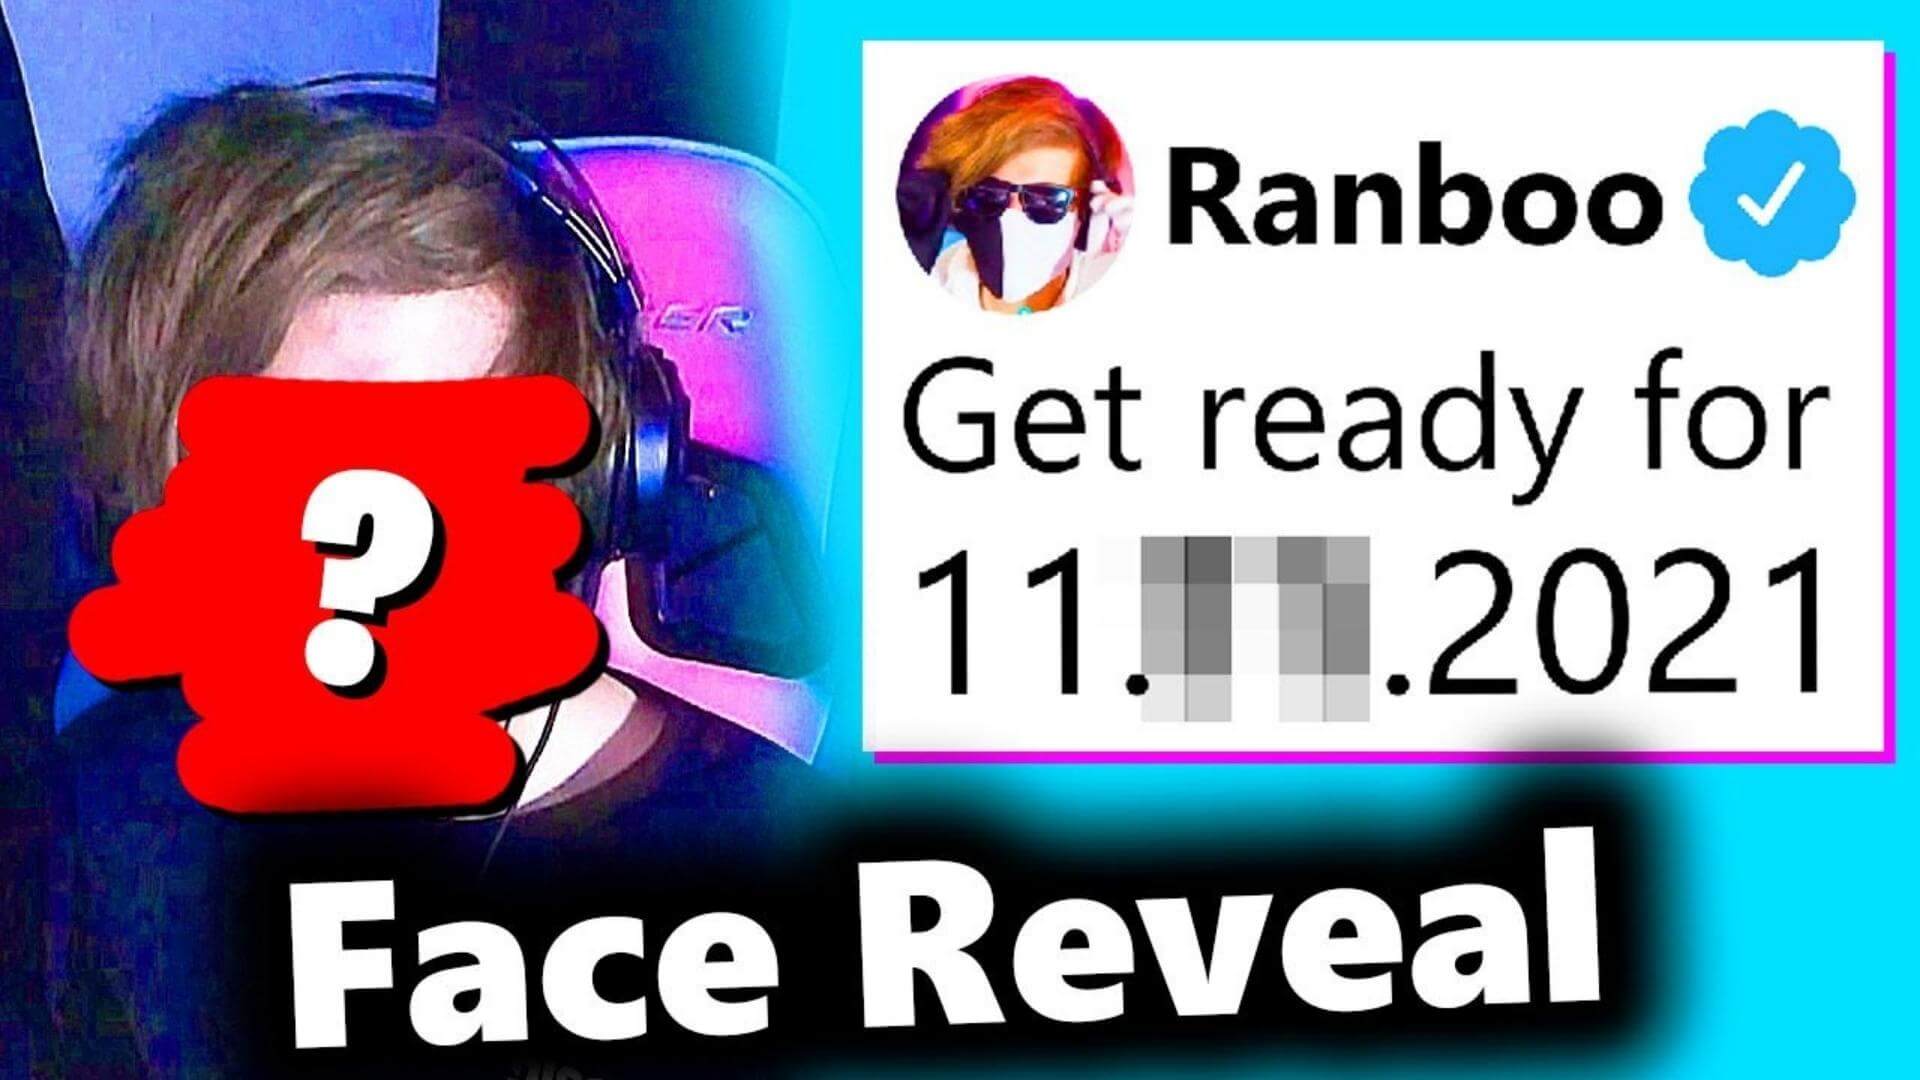 Ranboo face reveal